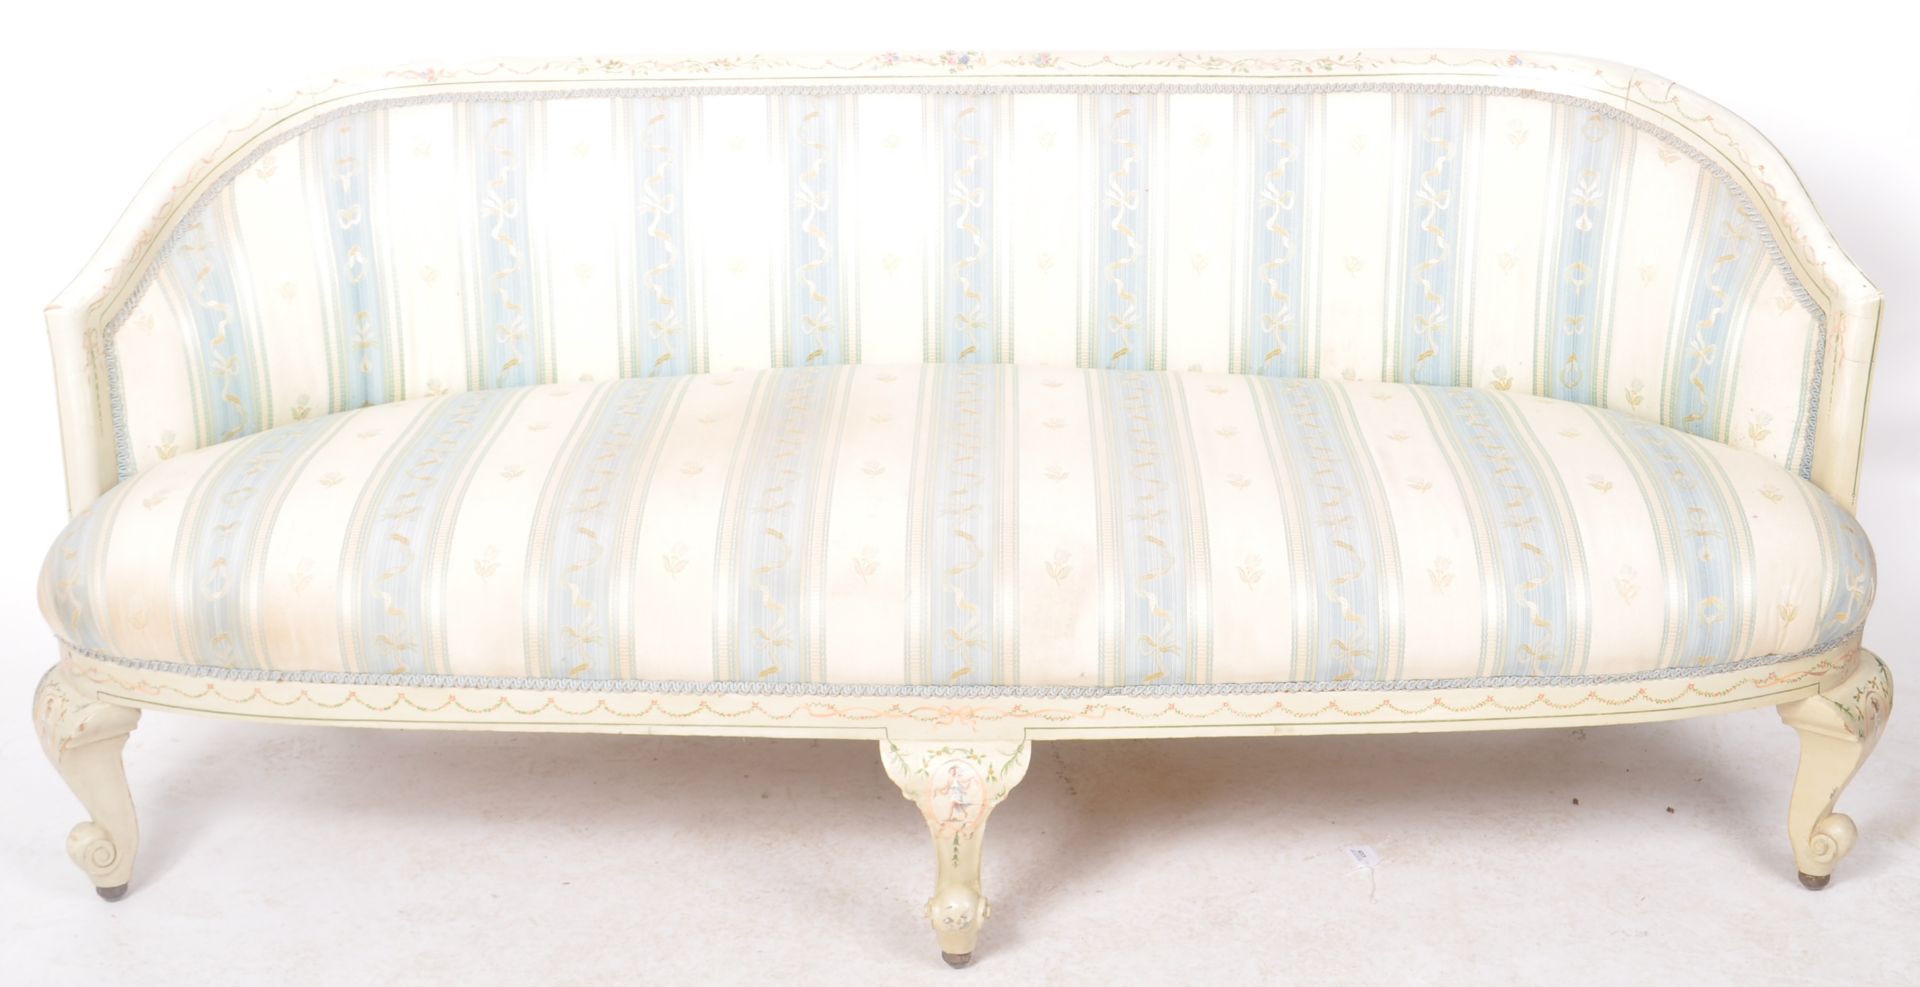 EARLY 20TH CENTURY LOUIS XVI CANAPE SOFA SETTEE - Image 2 of 9